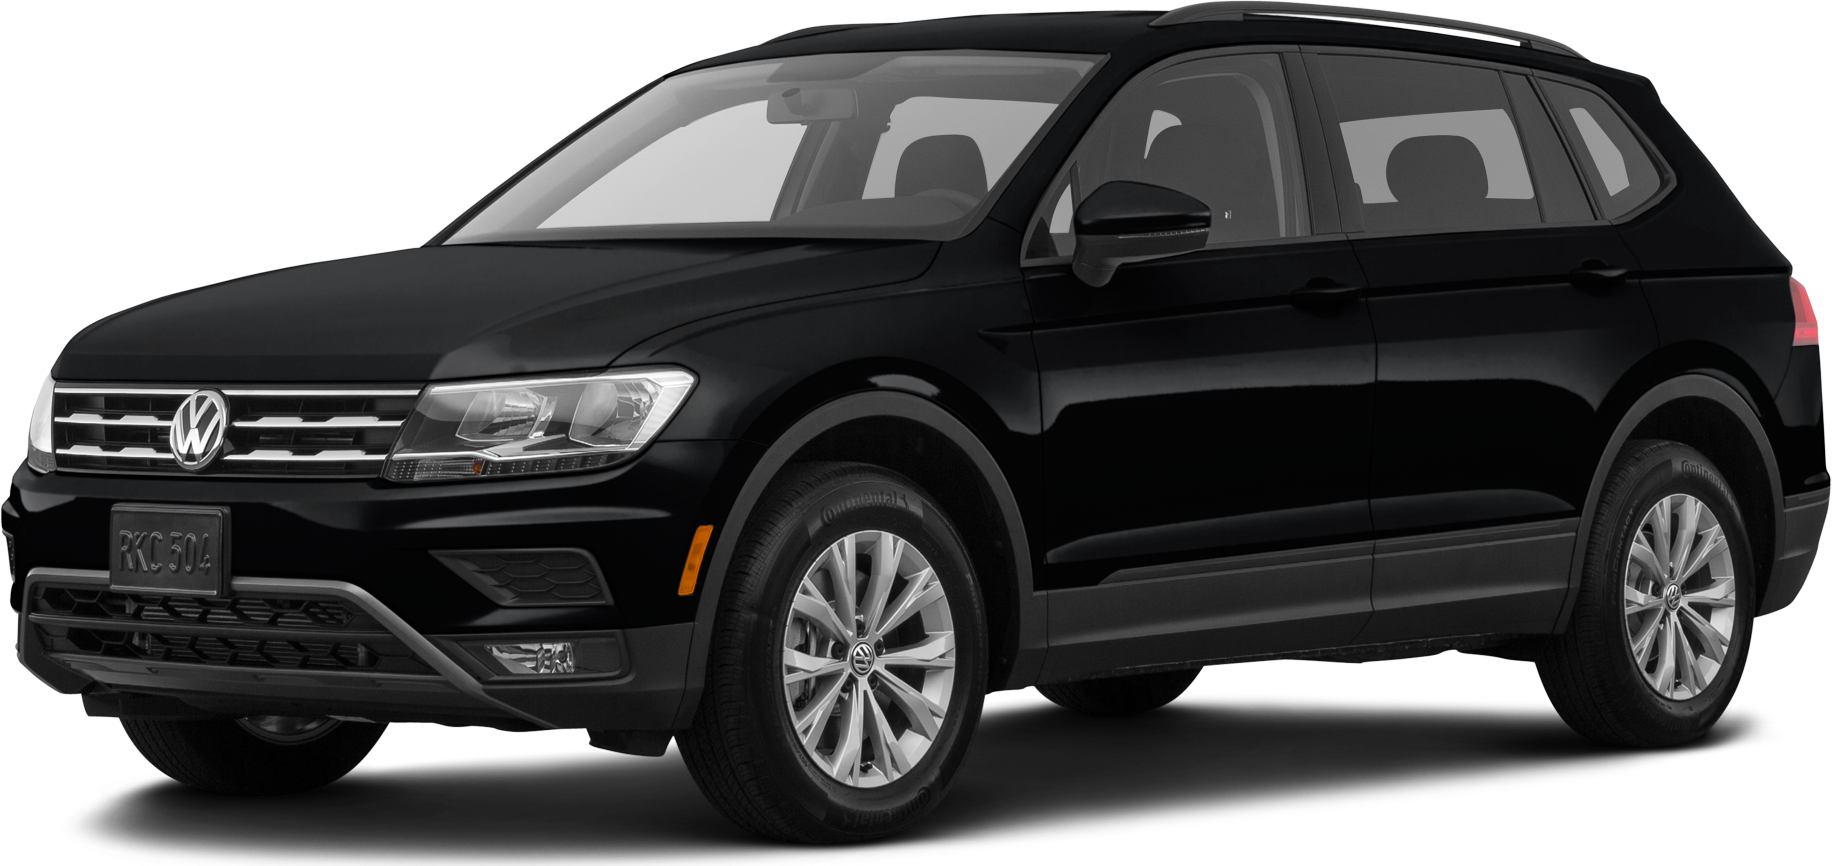 2018 Volkswagen Tiguan Values And Cars For Sale Kelley Blue Book